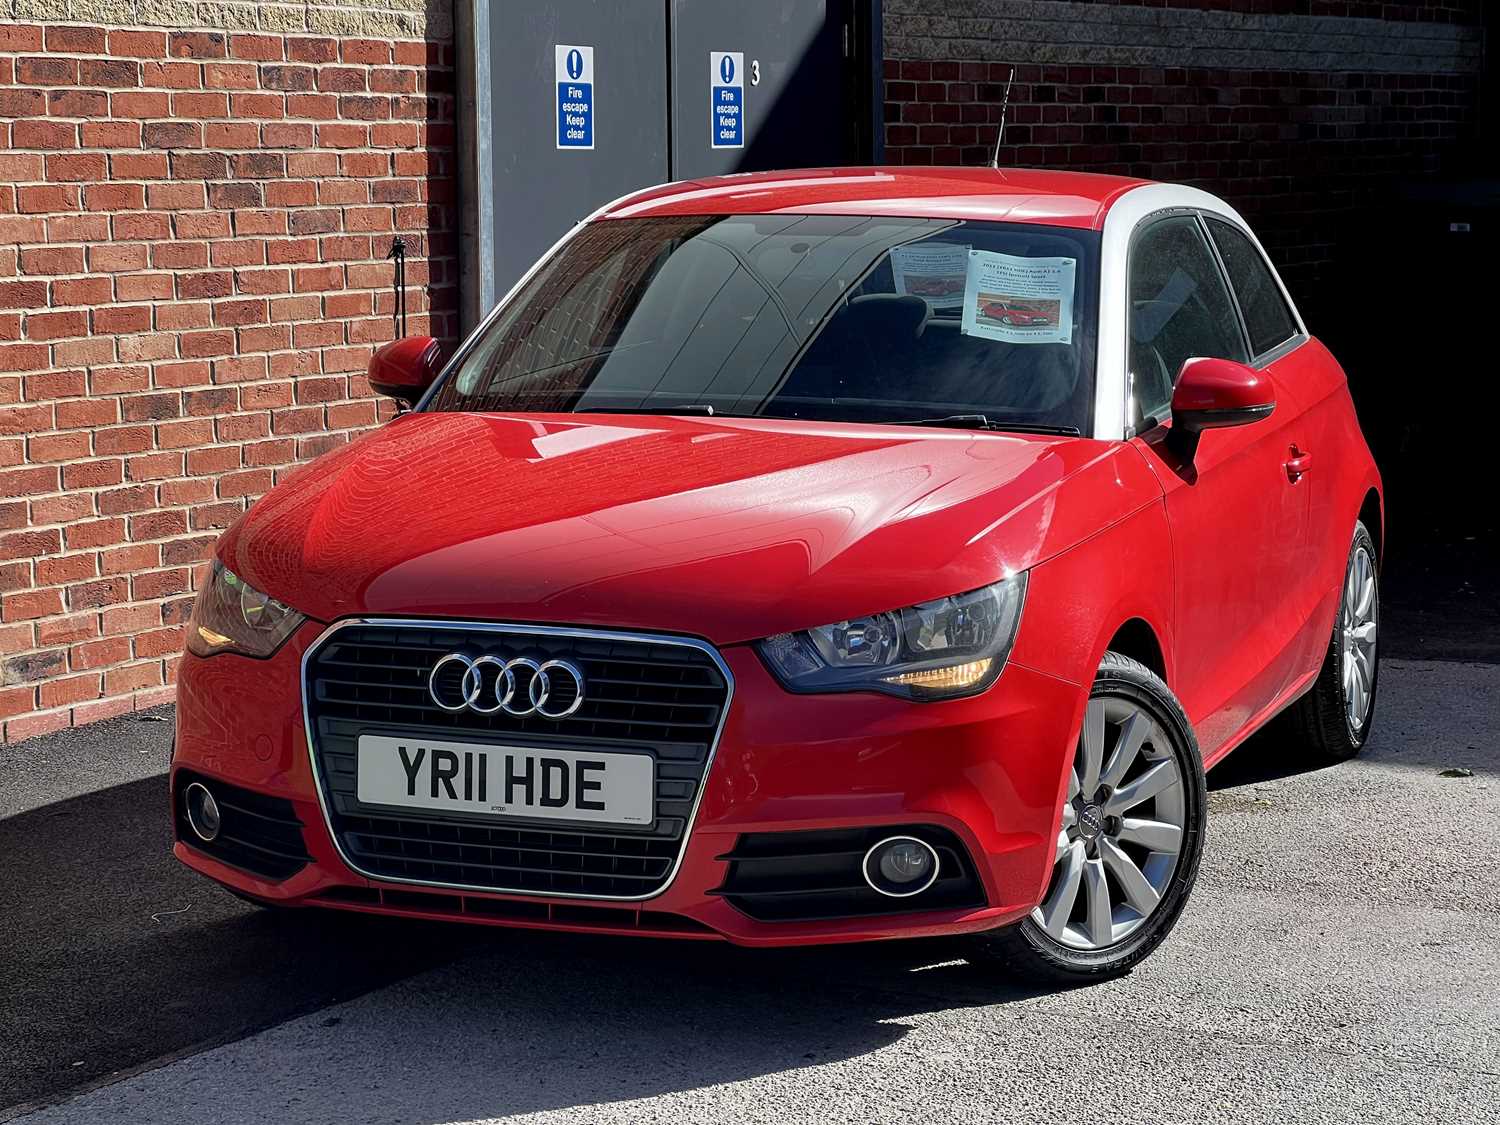 2011 [YR11 HDE] Audi A1 1.4 TFSI (petrol) Sport 3-door hatchback in red, 6-speed manual gearbox, - Image 2 of 7